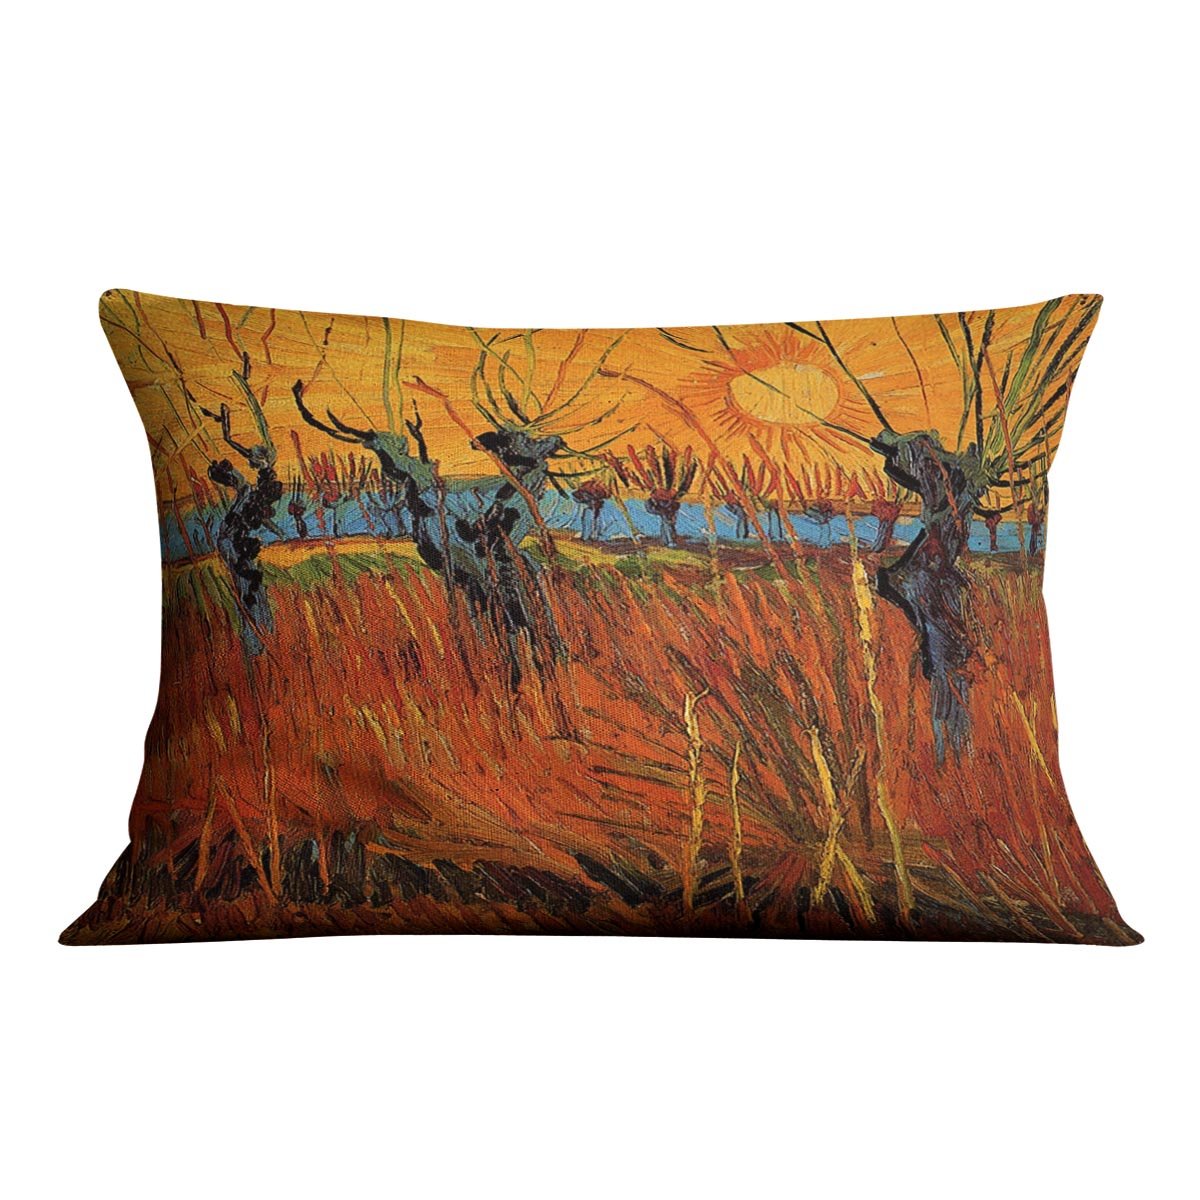 Willows at Sunset by Van Gogh Throw Pillow